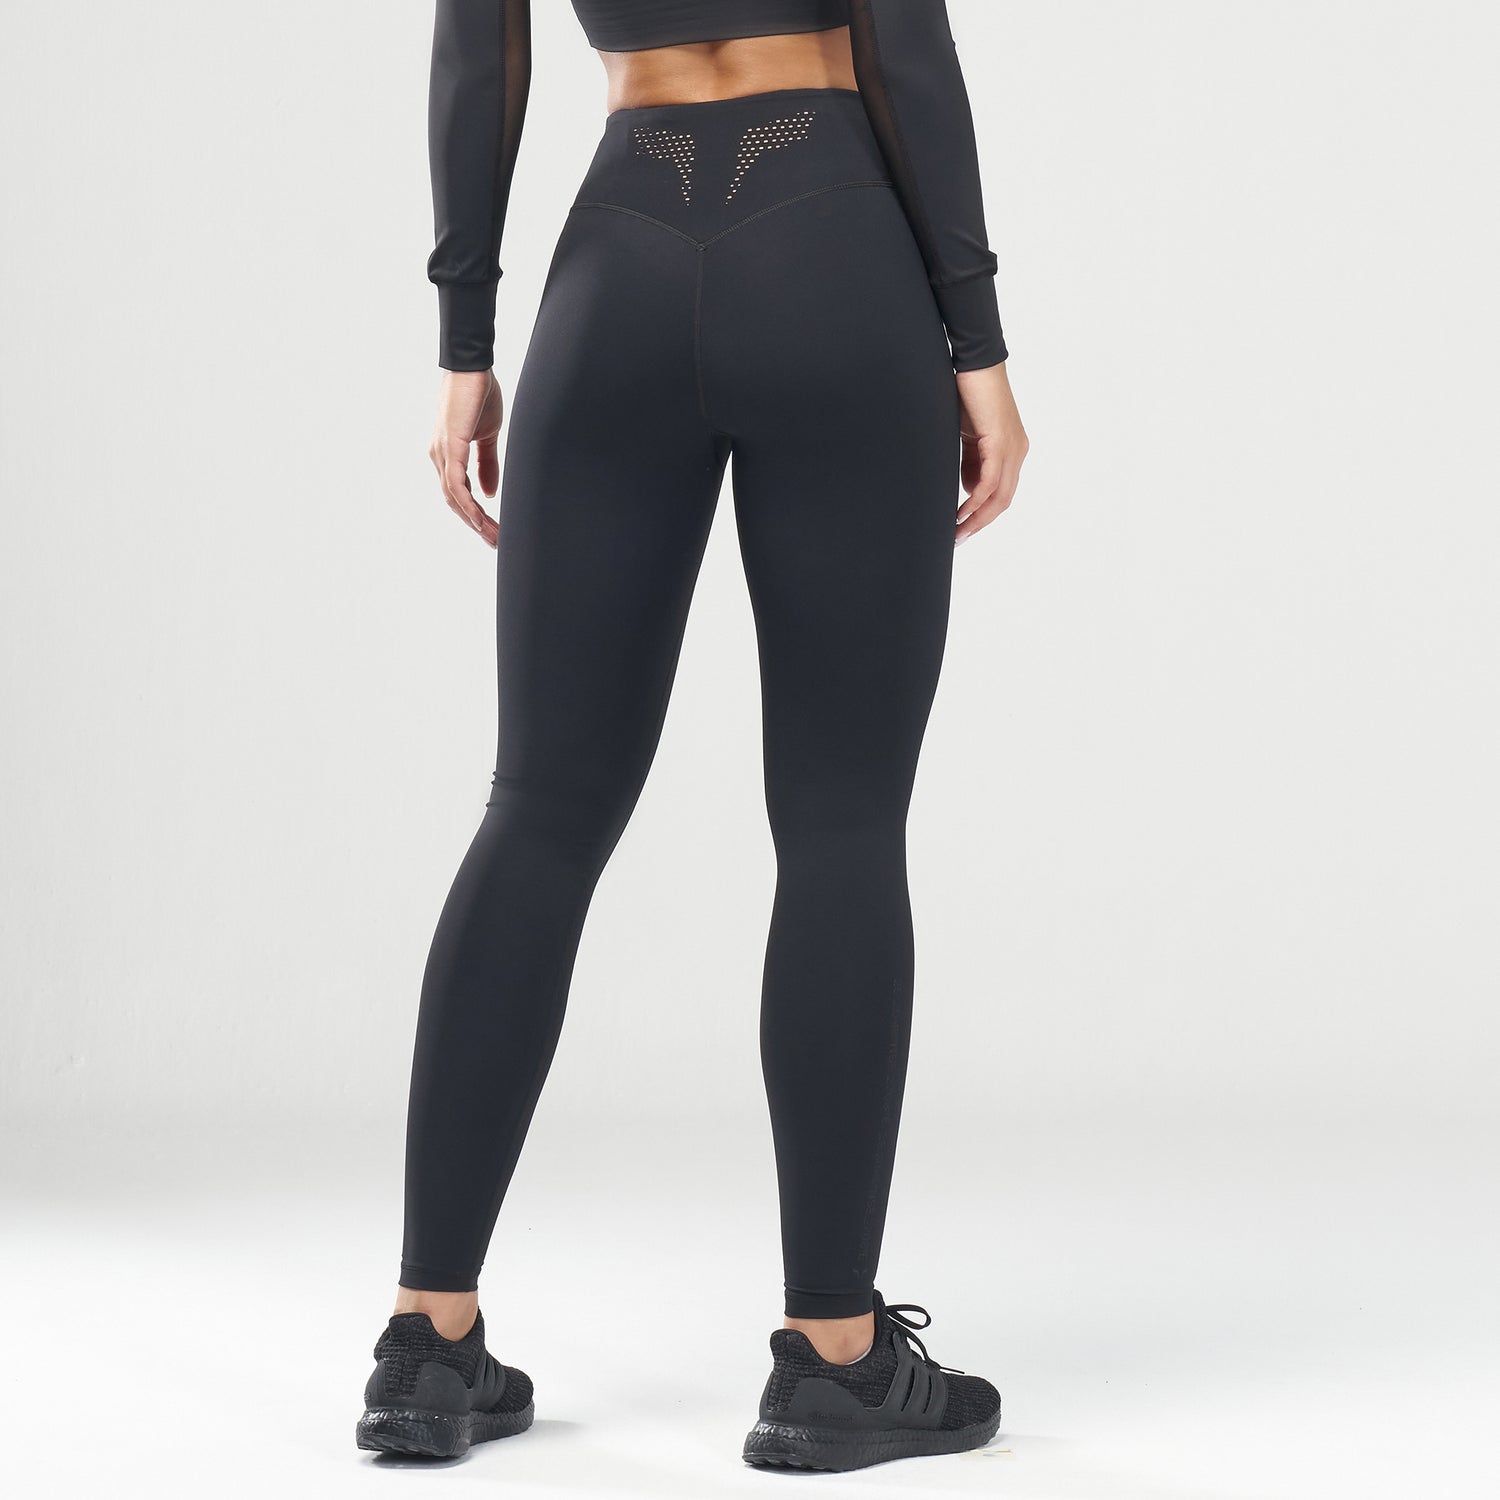 squatwolf-workout-clothes-code-run-the-city-leggings-black-gym-leggings-for-women